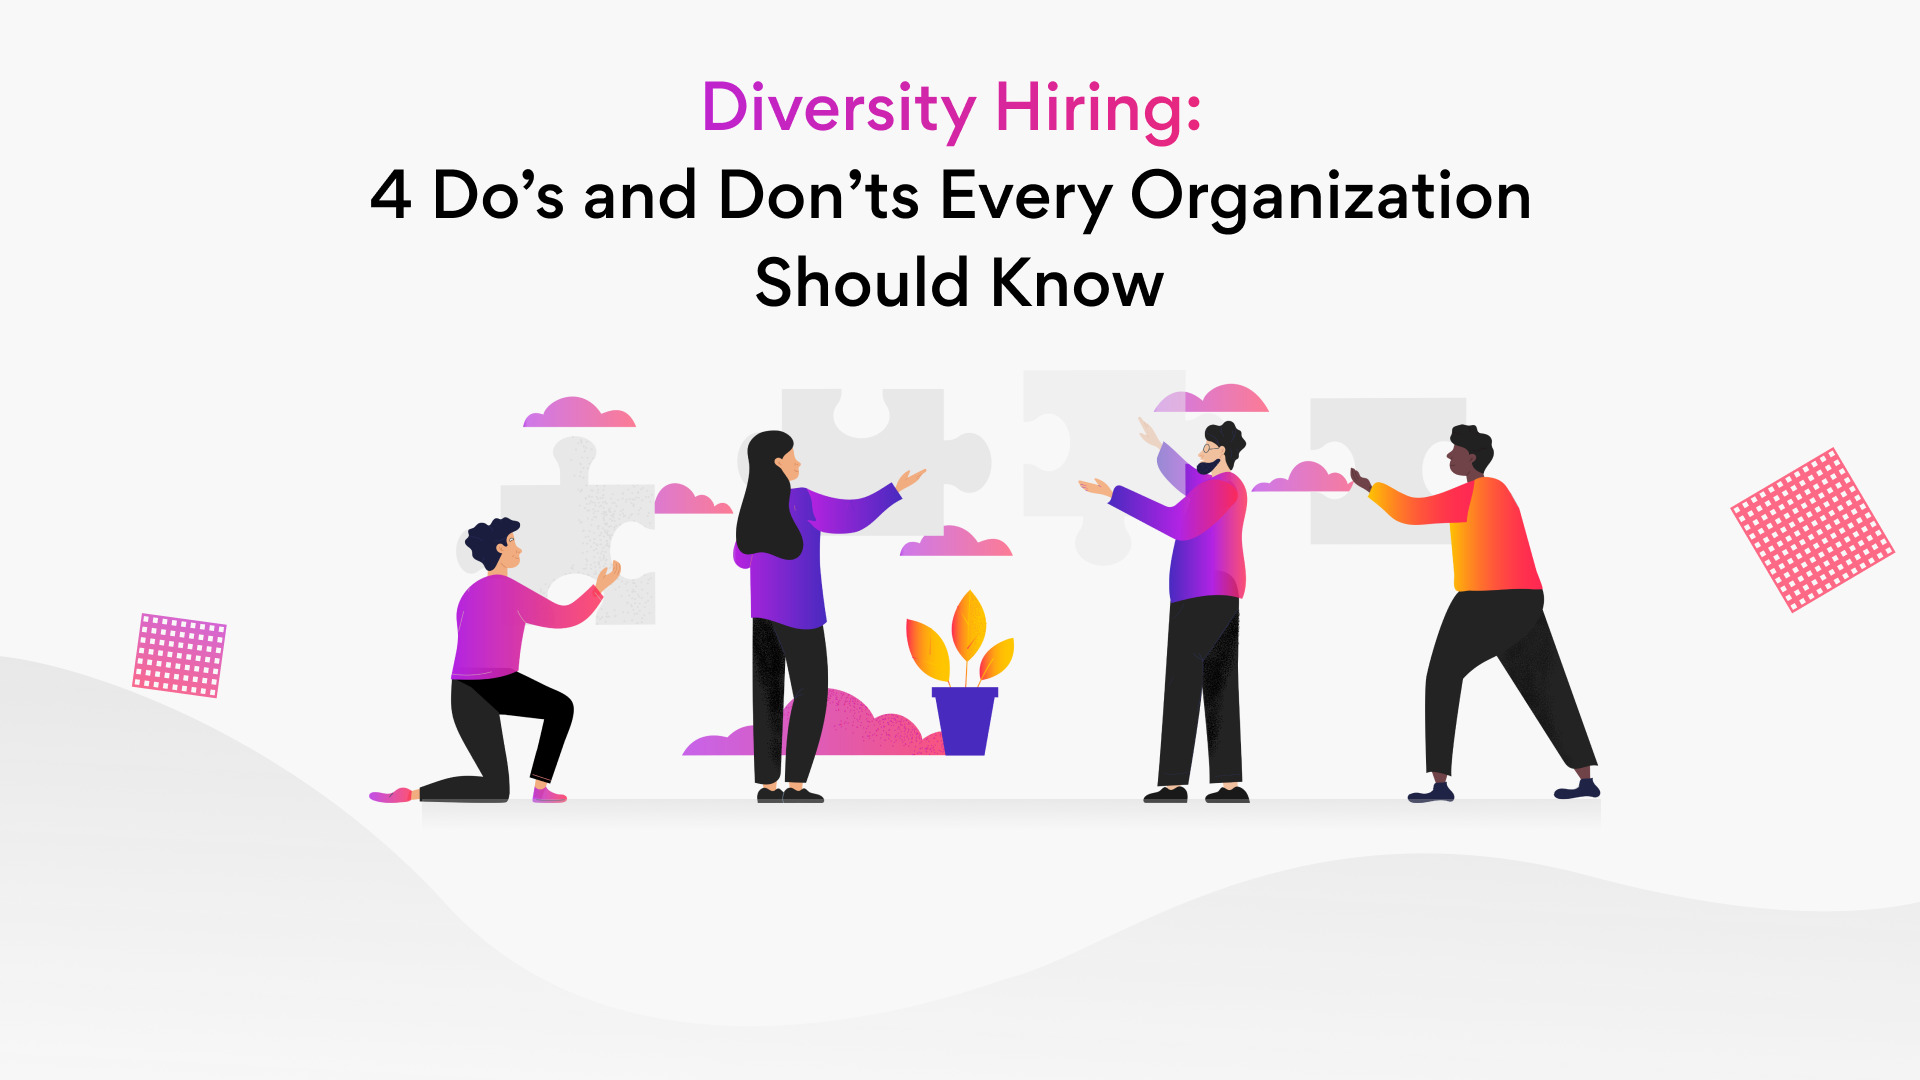 How To Hire Diverse People